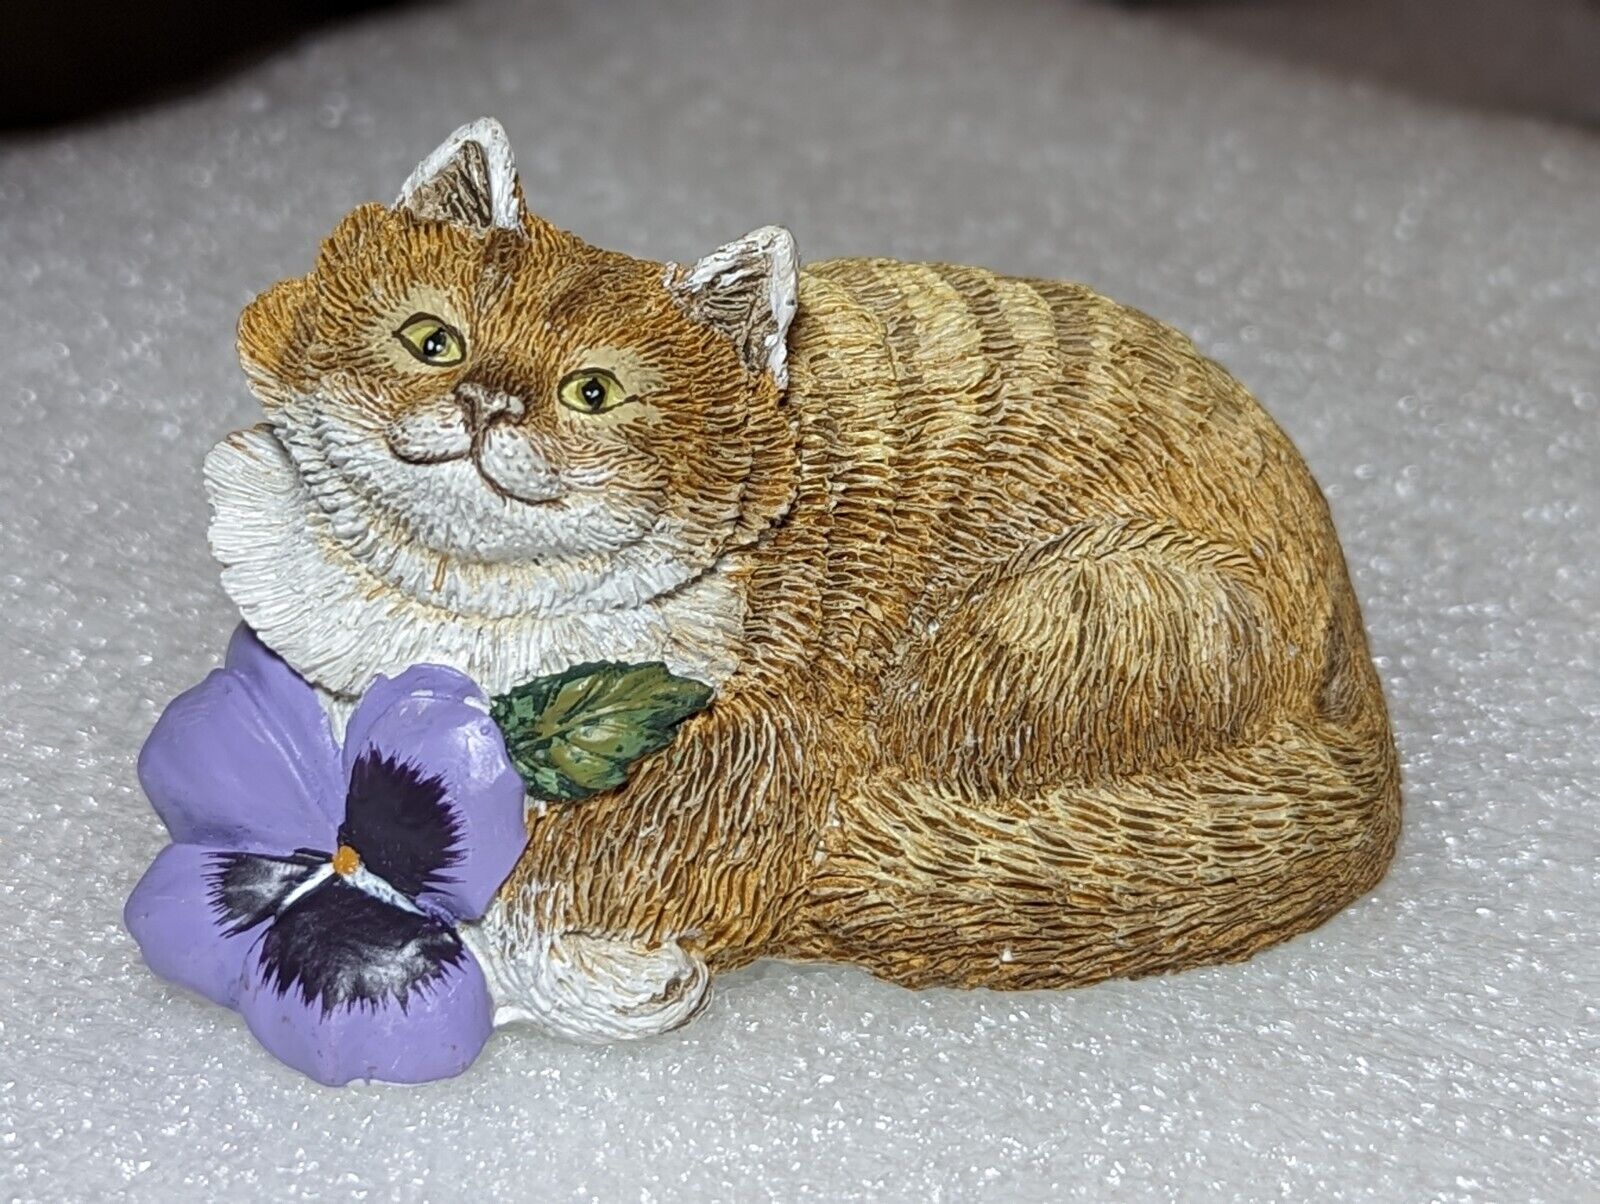 Valerie Pfeiffer Designs Resin Kitty Cat Figurine With Pansy Canadian Design